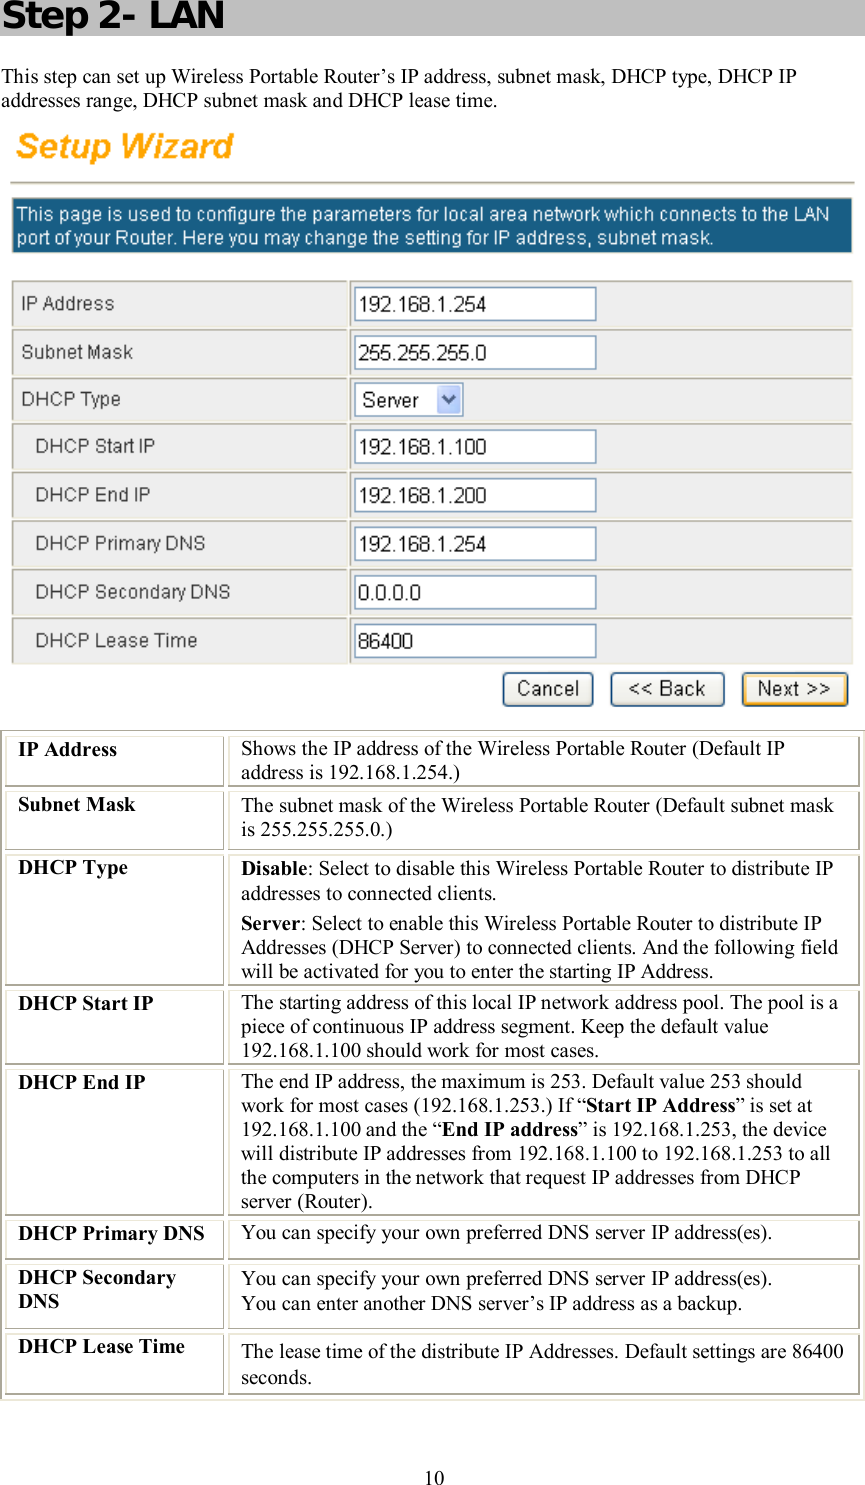    10 Step 2- LAN This step can set up Wireless Portable Router’s IP address, subnet mask, DHCP type, DHCP IP addresses range, DHCP subnet mask and DHCP lease time.  IP Address  Shows the IP address of the Wireless Portable Router (Default IP address is 192.168.1.254.) Subnet Mask  The subnet mask of the Wireless Portable Router (Default subnet mask is 255.255.255.0.) DHCP Type  Disable: Select to disable this Wireless Portable Router to distribute IP addresses to connected clients. Server: Select to enable this Wireless Portable Router to distribute IP Addresses (DHCP Server) to connected clients. And the following field will be activated for you to enter the starting IP Address. DHCP Start IP  The starting address of this local IP network address pool. The pool is a piece of continuous IP address segment. Keep the default value 192.168.1.100 should work for most cases. DHCP End IP  The end IP address, the maximum is 253. Default value 253 should work for most cases (192.168.1.253.) If “Start IP Address” is set at 192.168.1.100 and the “End IP address” is 192.168.1.253, the device will distribute IP addresses from 192.168.1.100 to 192.168.1.253 to all the computers in the network that request IP addresses from DHCP server (Router). DHCP Primary DNS  You can specify your own preferred DNS server IP address(es).  DHCP Secondary DNS You can specify your own preferred DNS server IP address(es).  You can enter another DNS server’s IP address as a backup. DHCP Lease Time  The lease time of the distribute IP Addresses. Default settings are 86400 seconds.  